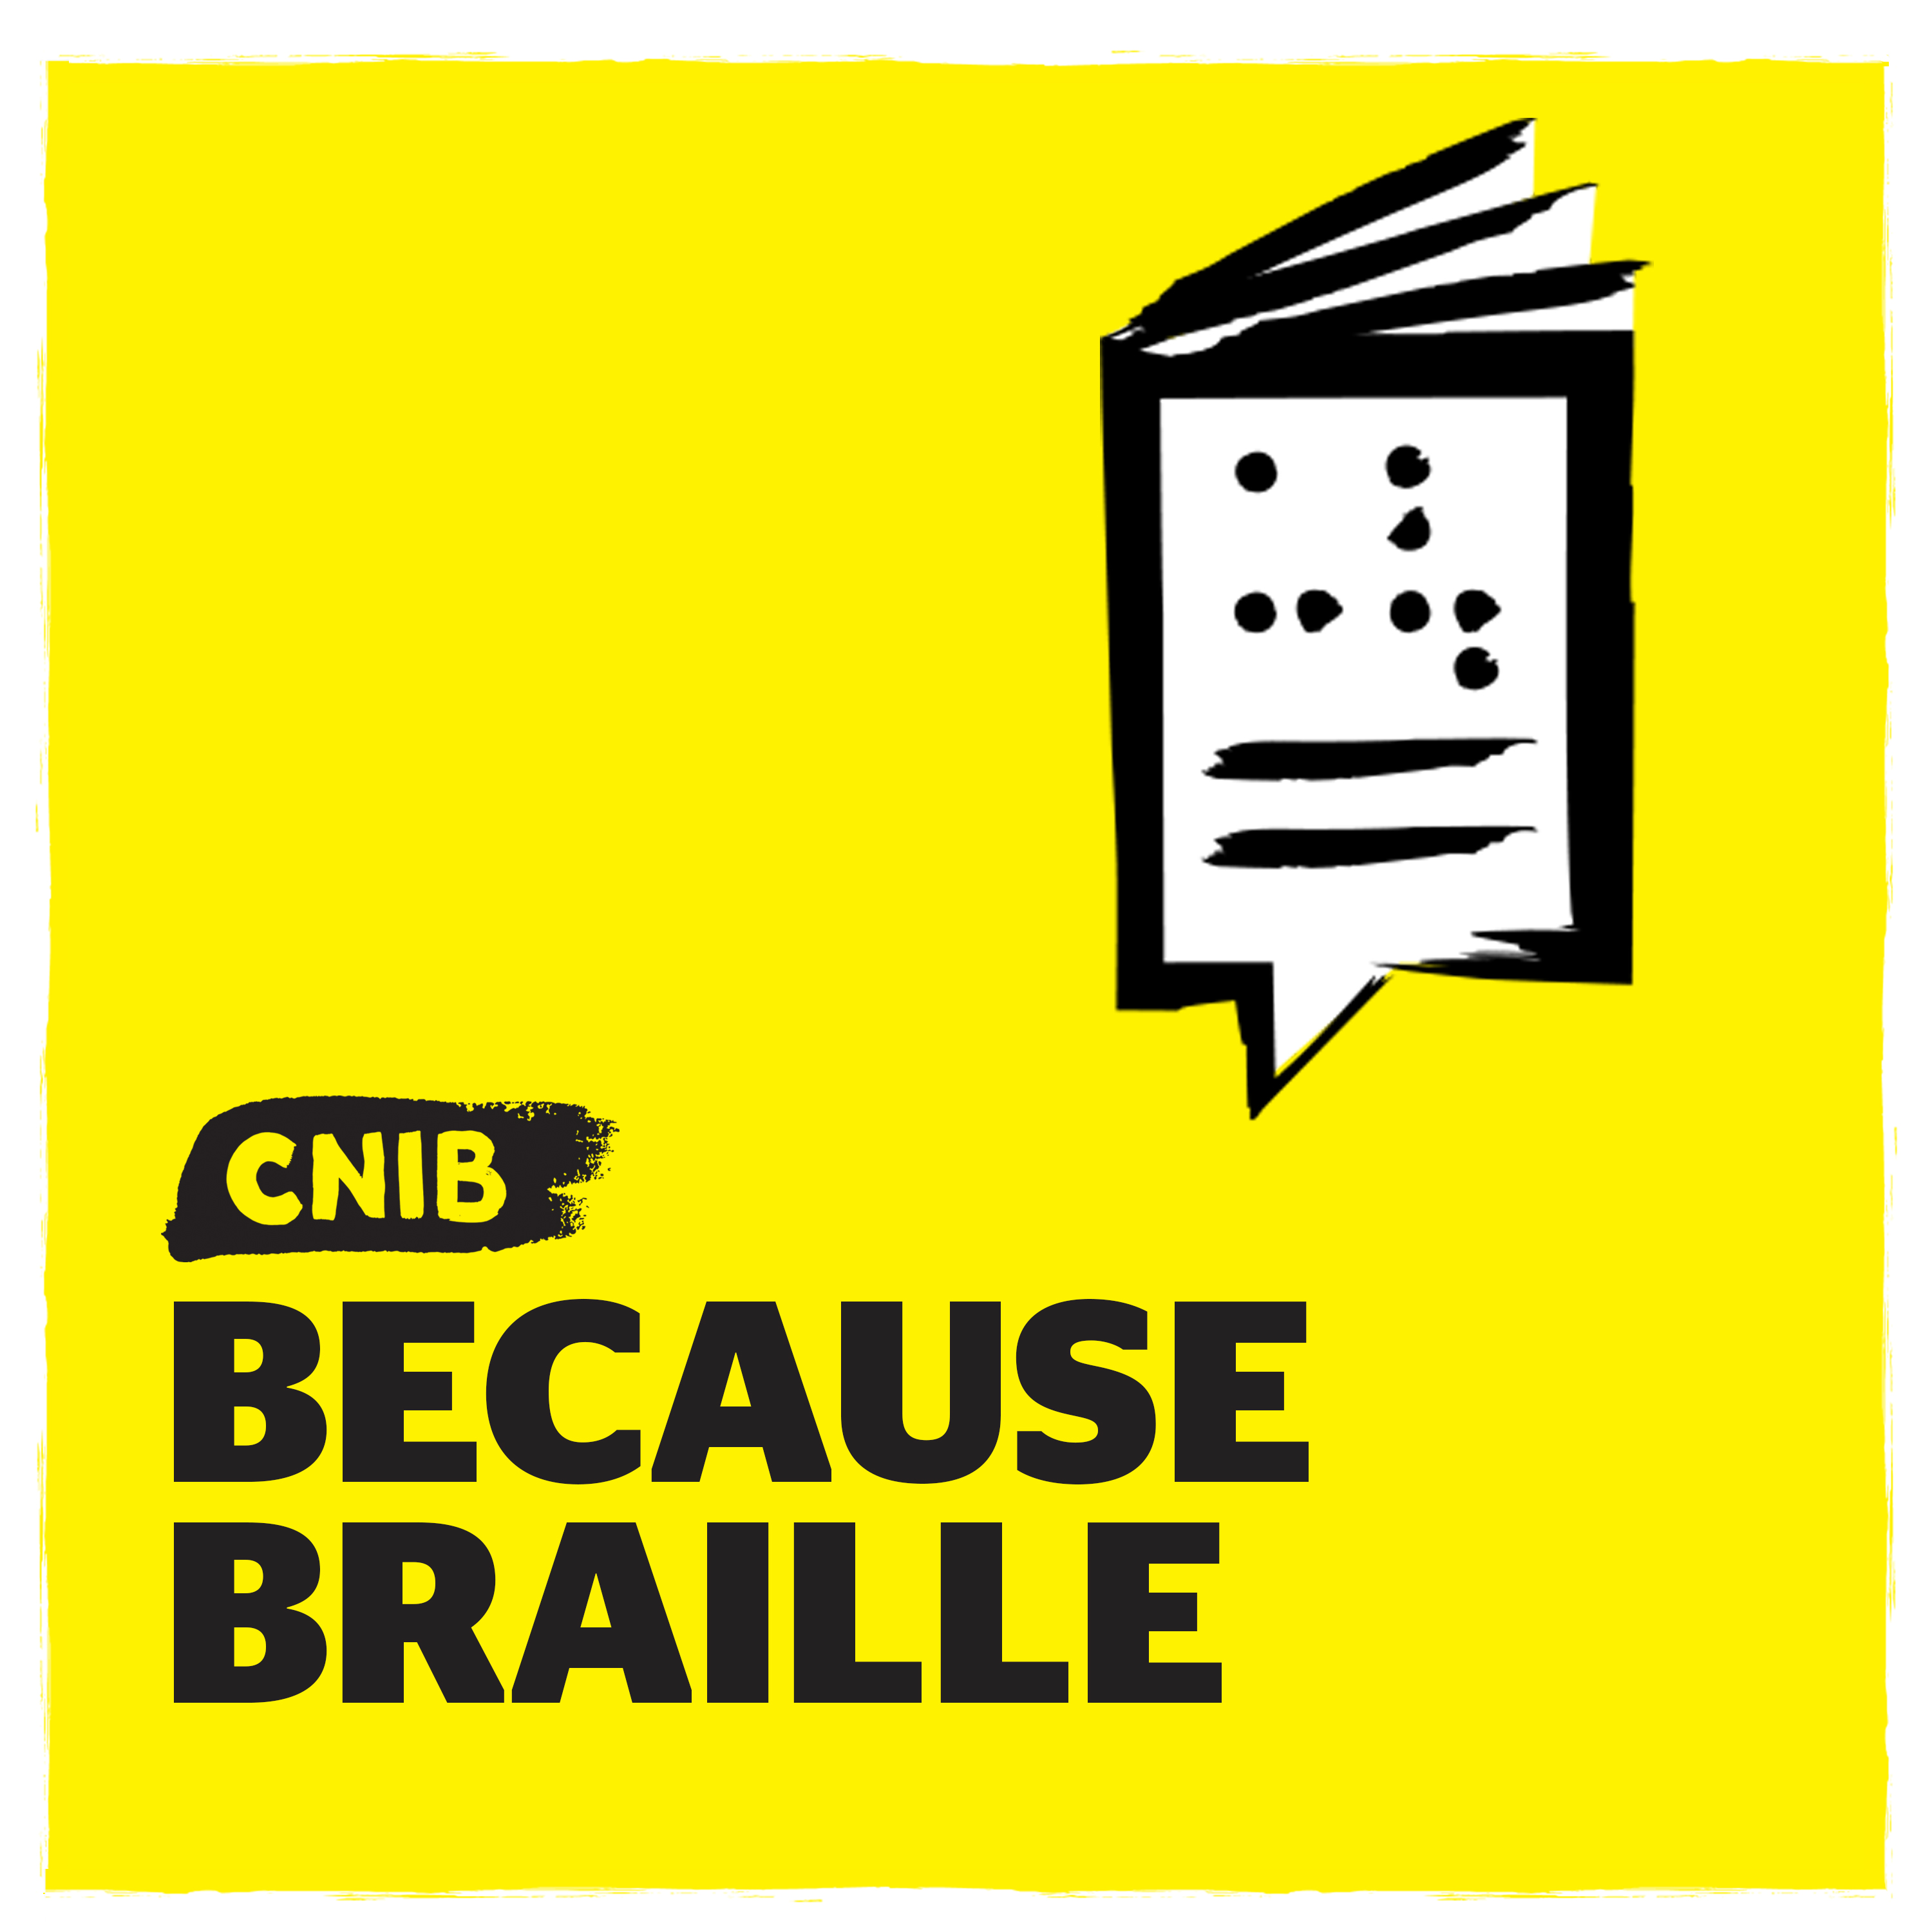 CNIB Because Braille logo. An illustration of a braille book with a speech bubble icon on yellow.